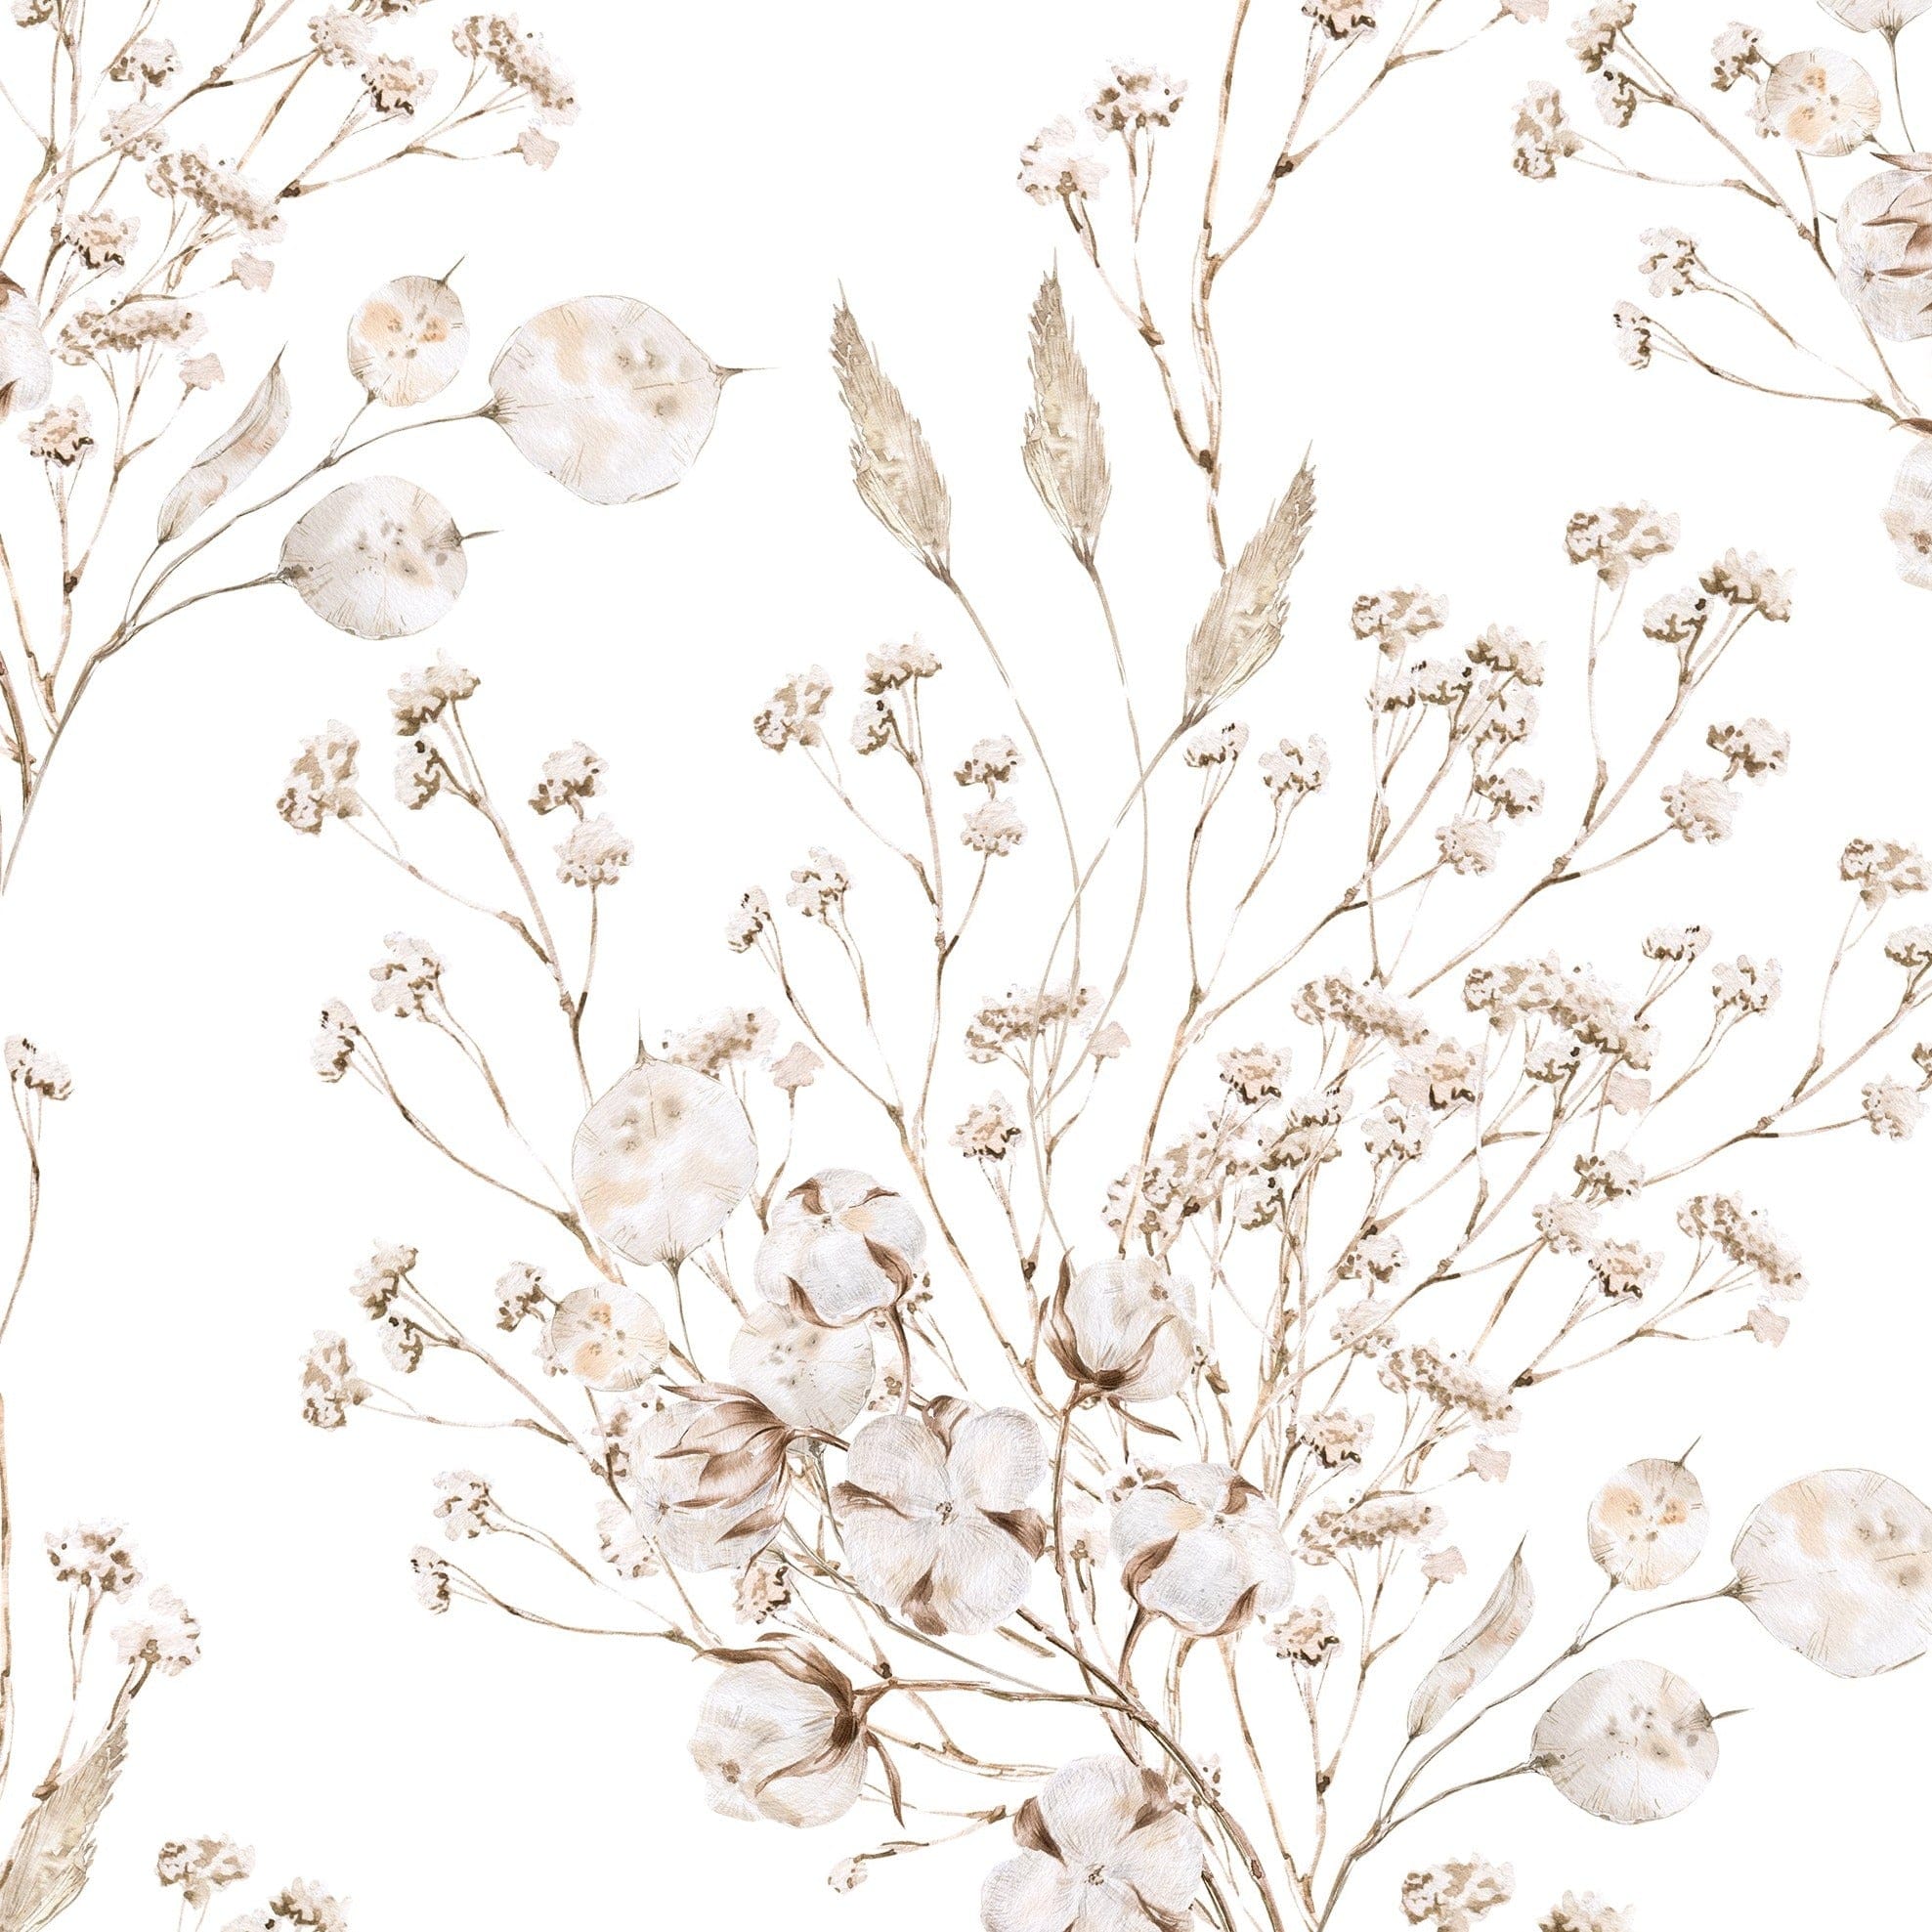 An elegant Boho Winter Floral Wallpaper pattern with detailed botanical illustrations in neutral tones, adding a serene, natural aesthetic to the room.